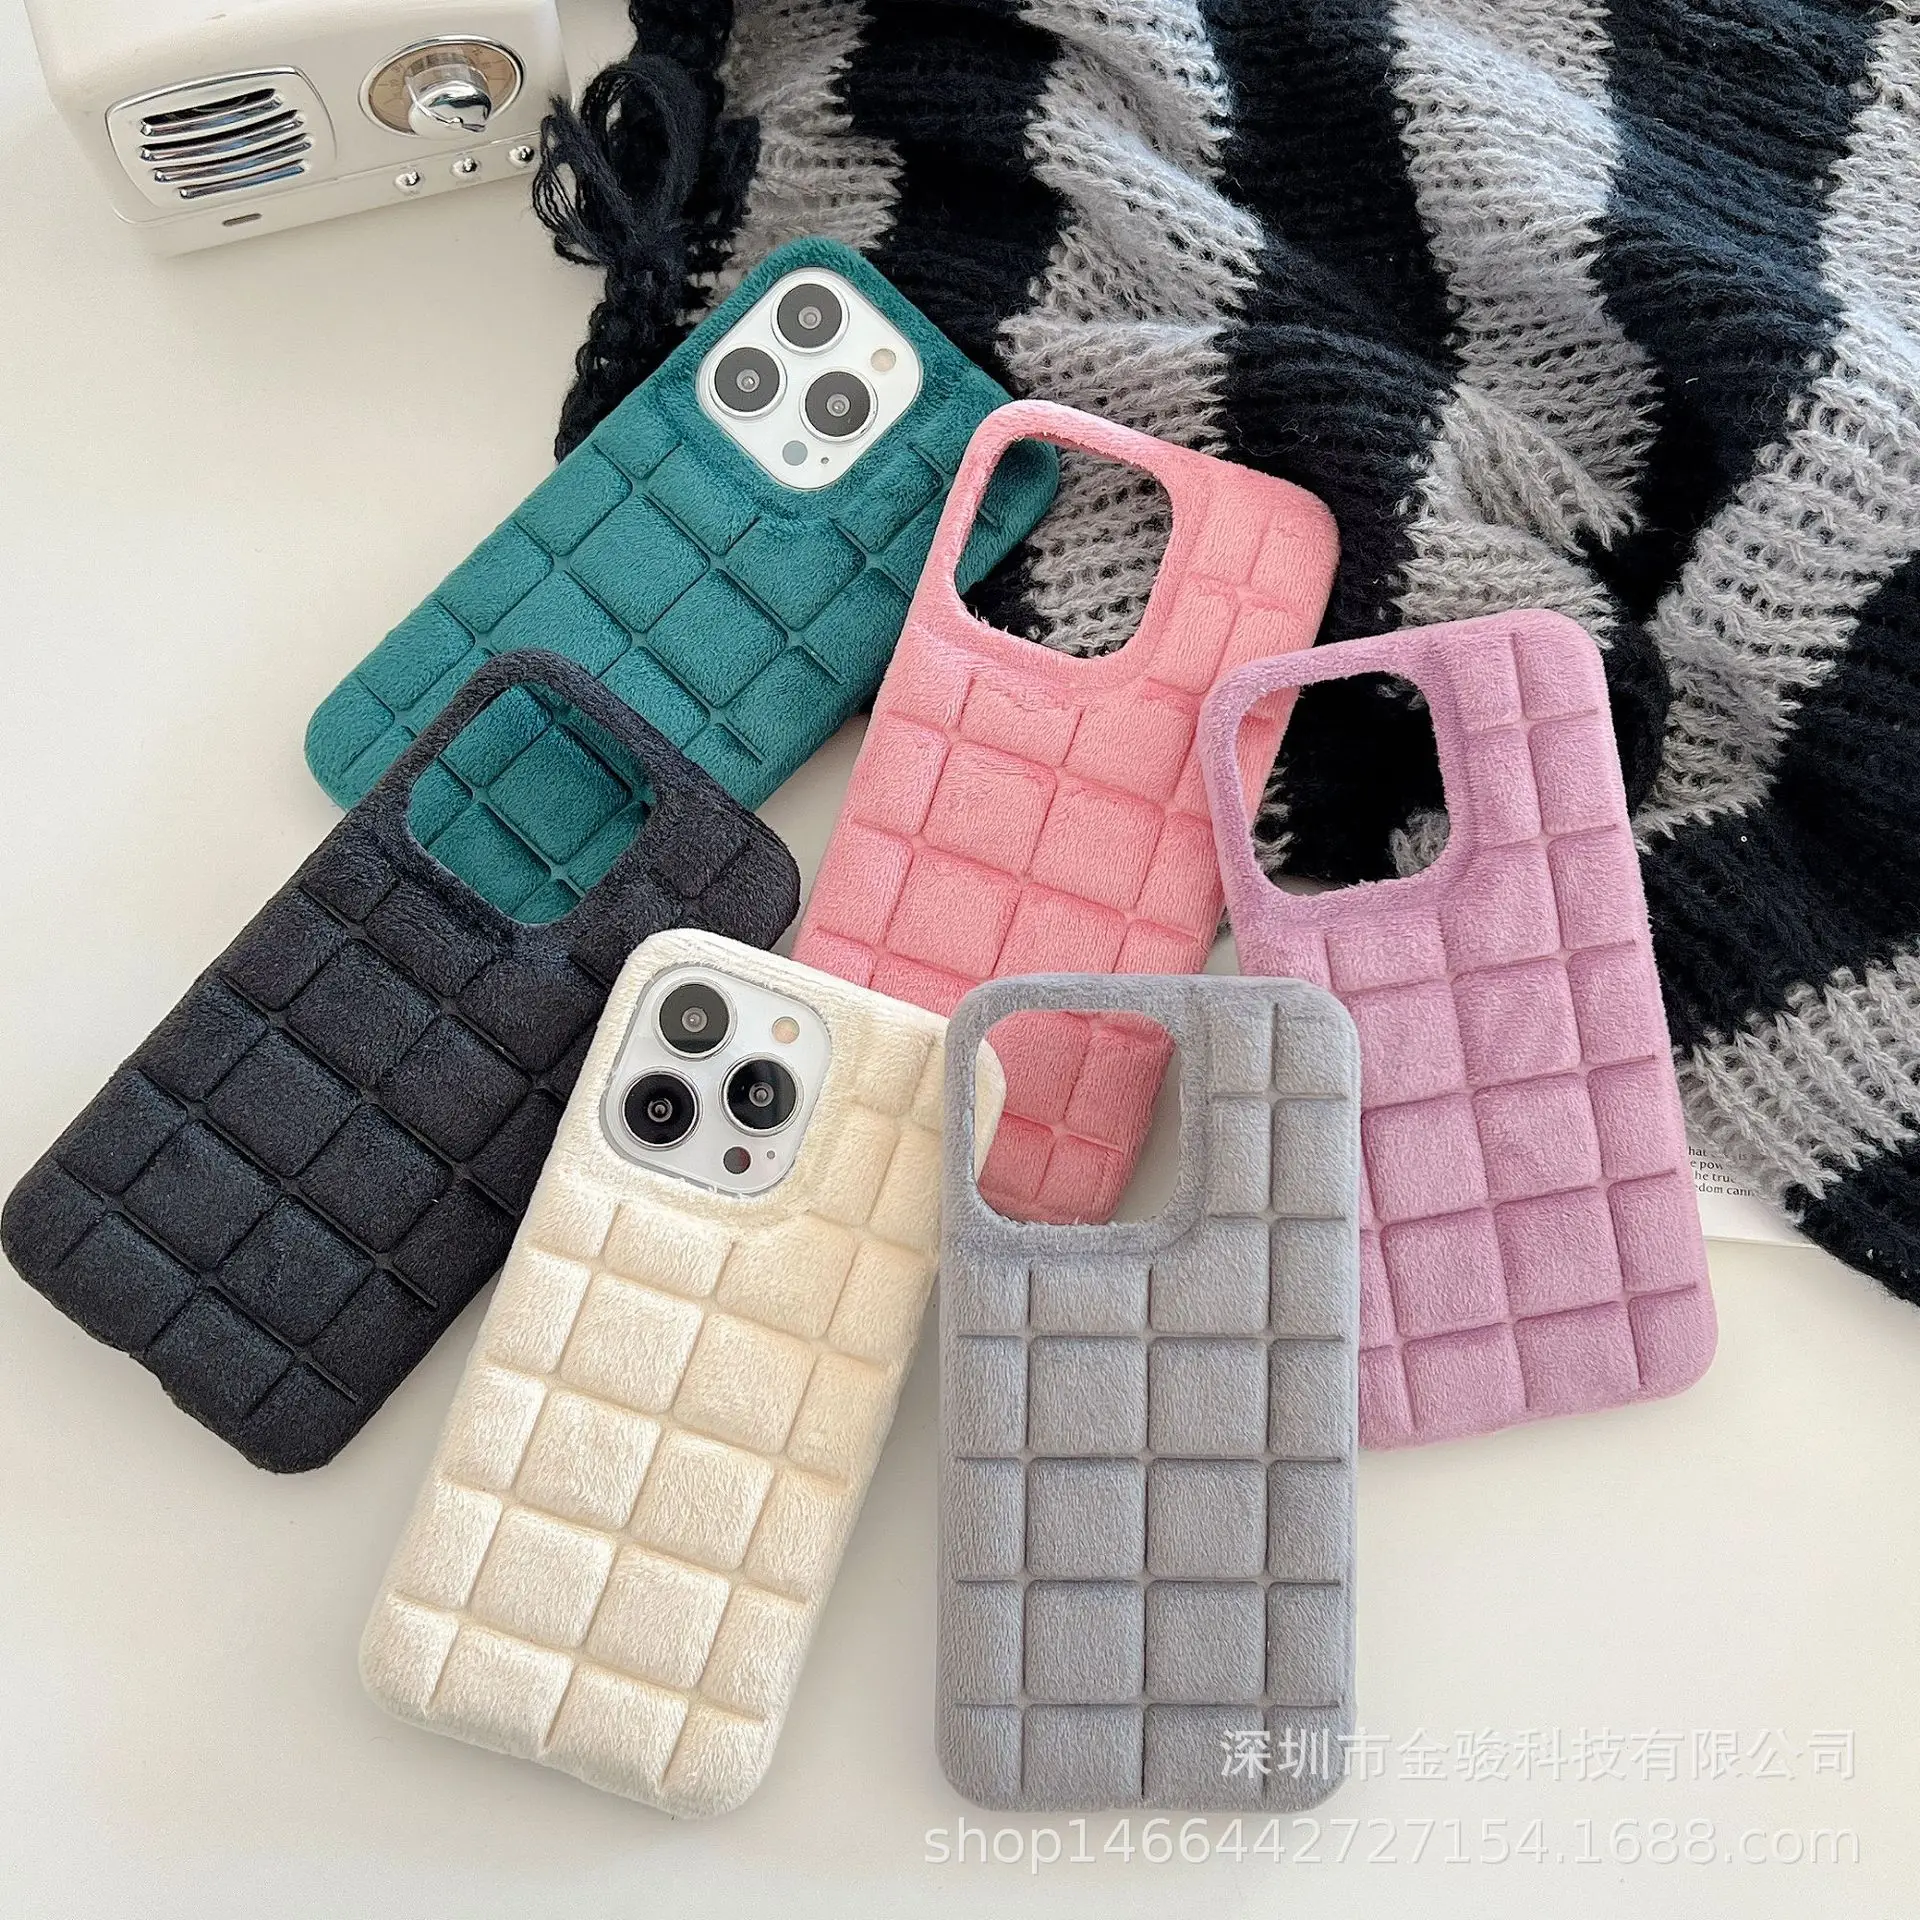 Suitable For IPhone14promax 13pro New Autumn And Winter Solid Color Plush Plaid Fashion Mobile Phone Case